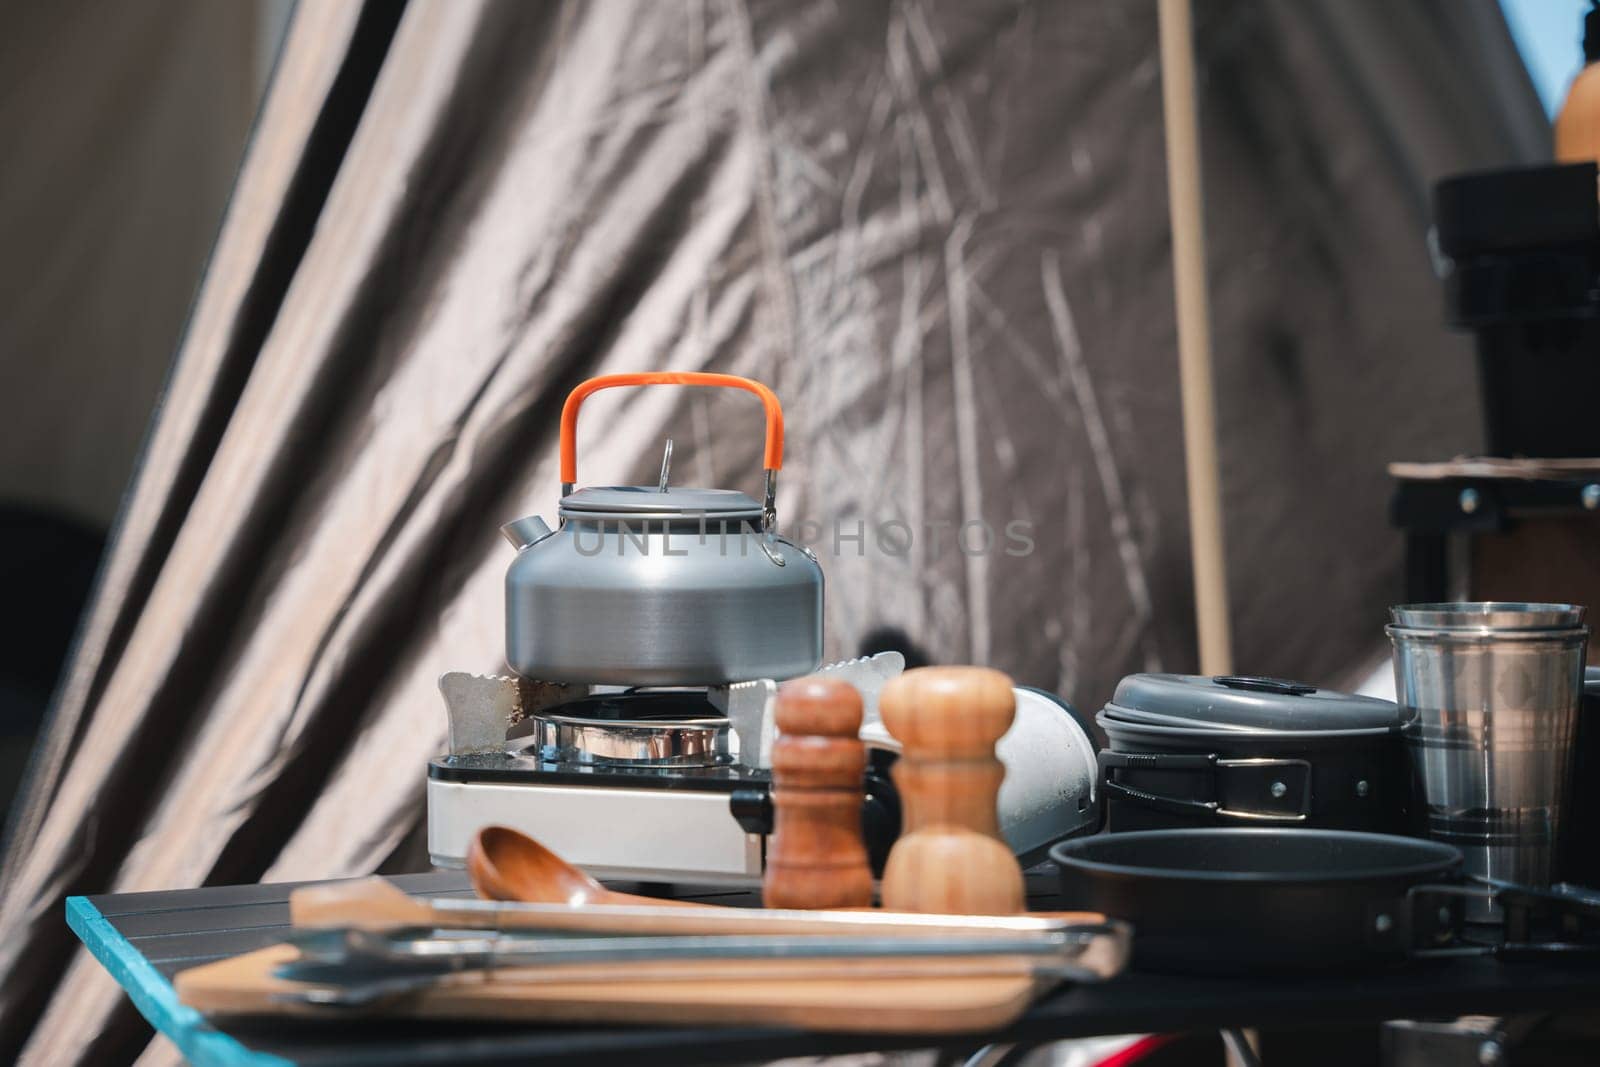 Campsite perfection, kettle, pot, pan, gas stove, flashlight, and camera neatly arranged at the front of the tent. Experience the joy of camping amidst nature's beauty. by Sorapop